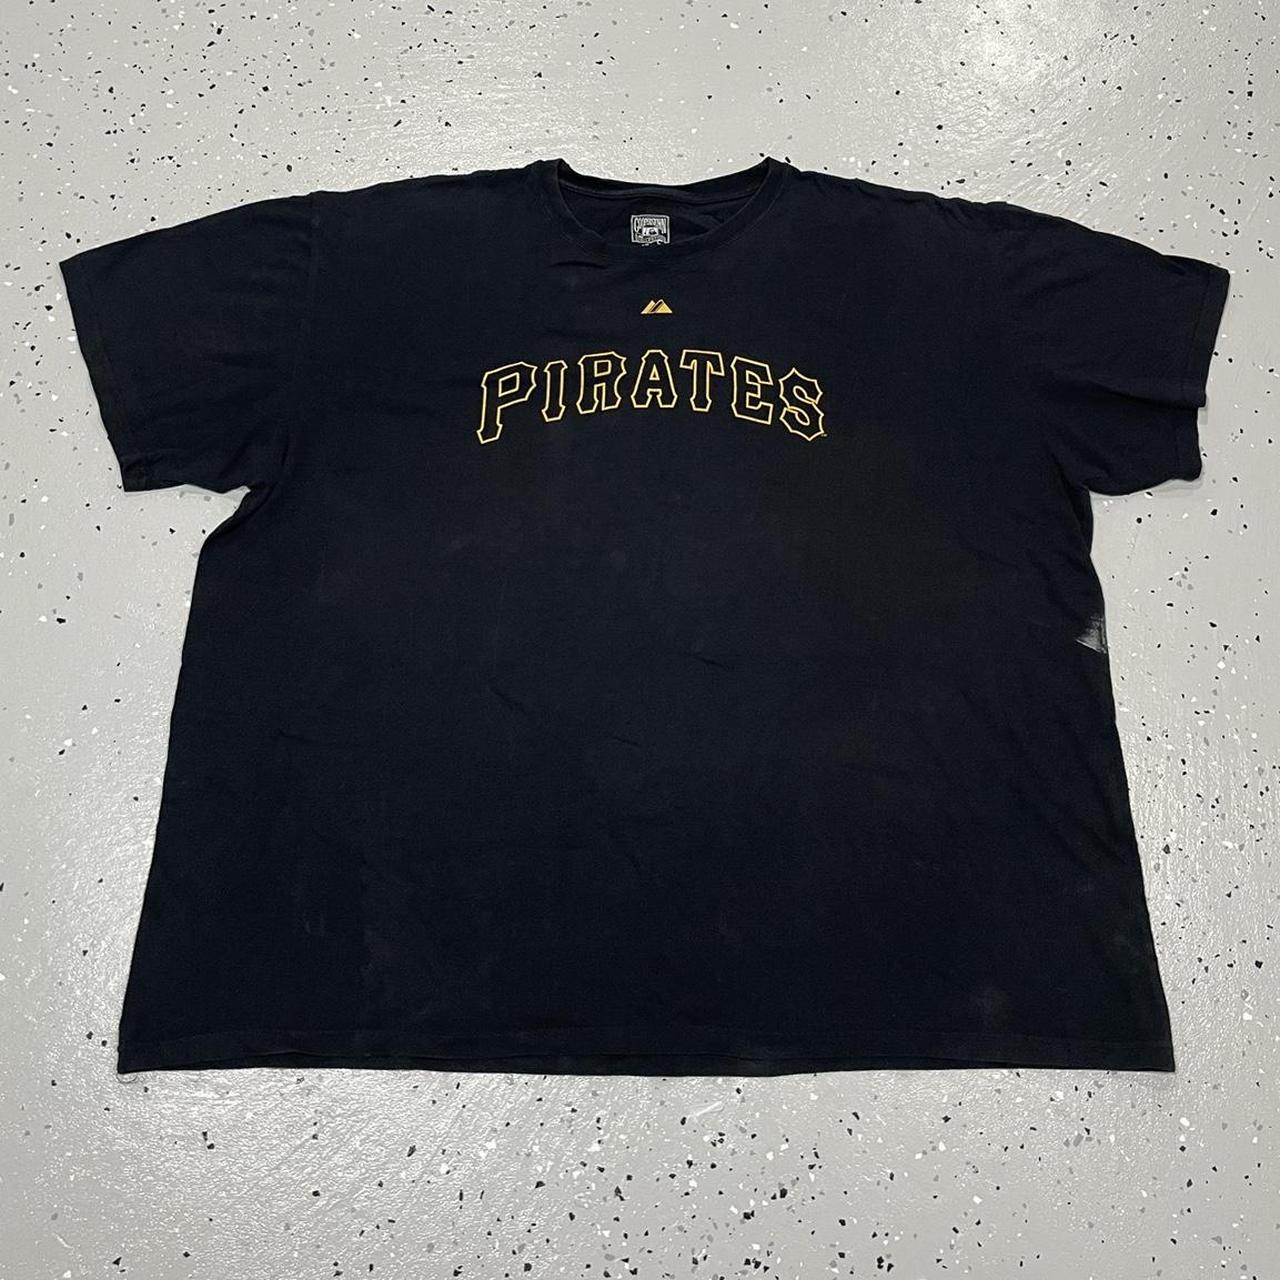 Majestic Men's Roberto Clemente Pittsburgh Pirates Cooperstown